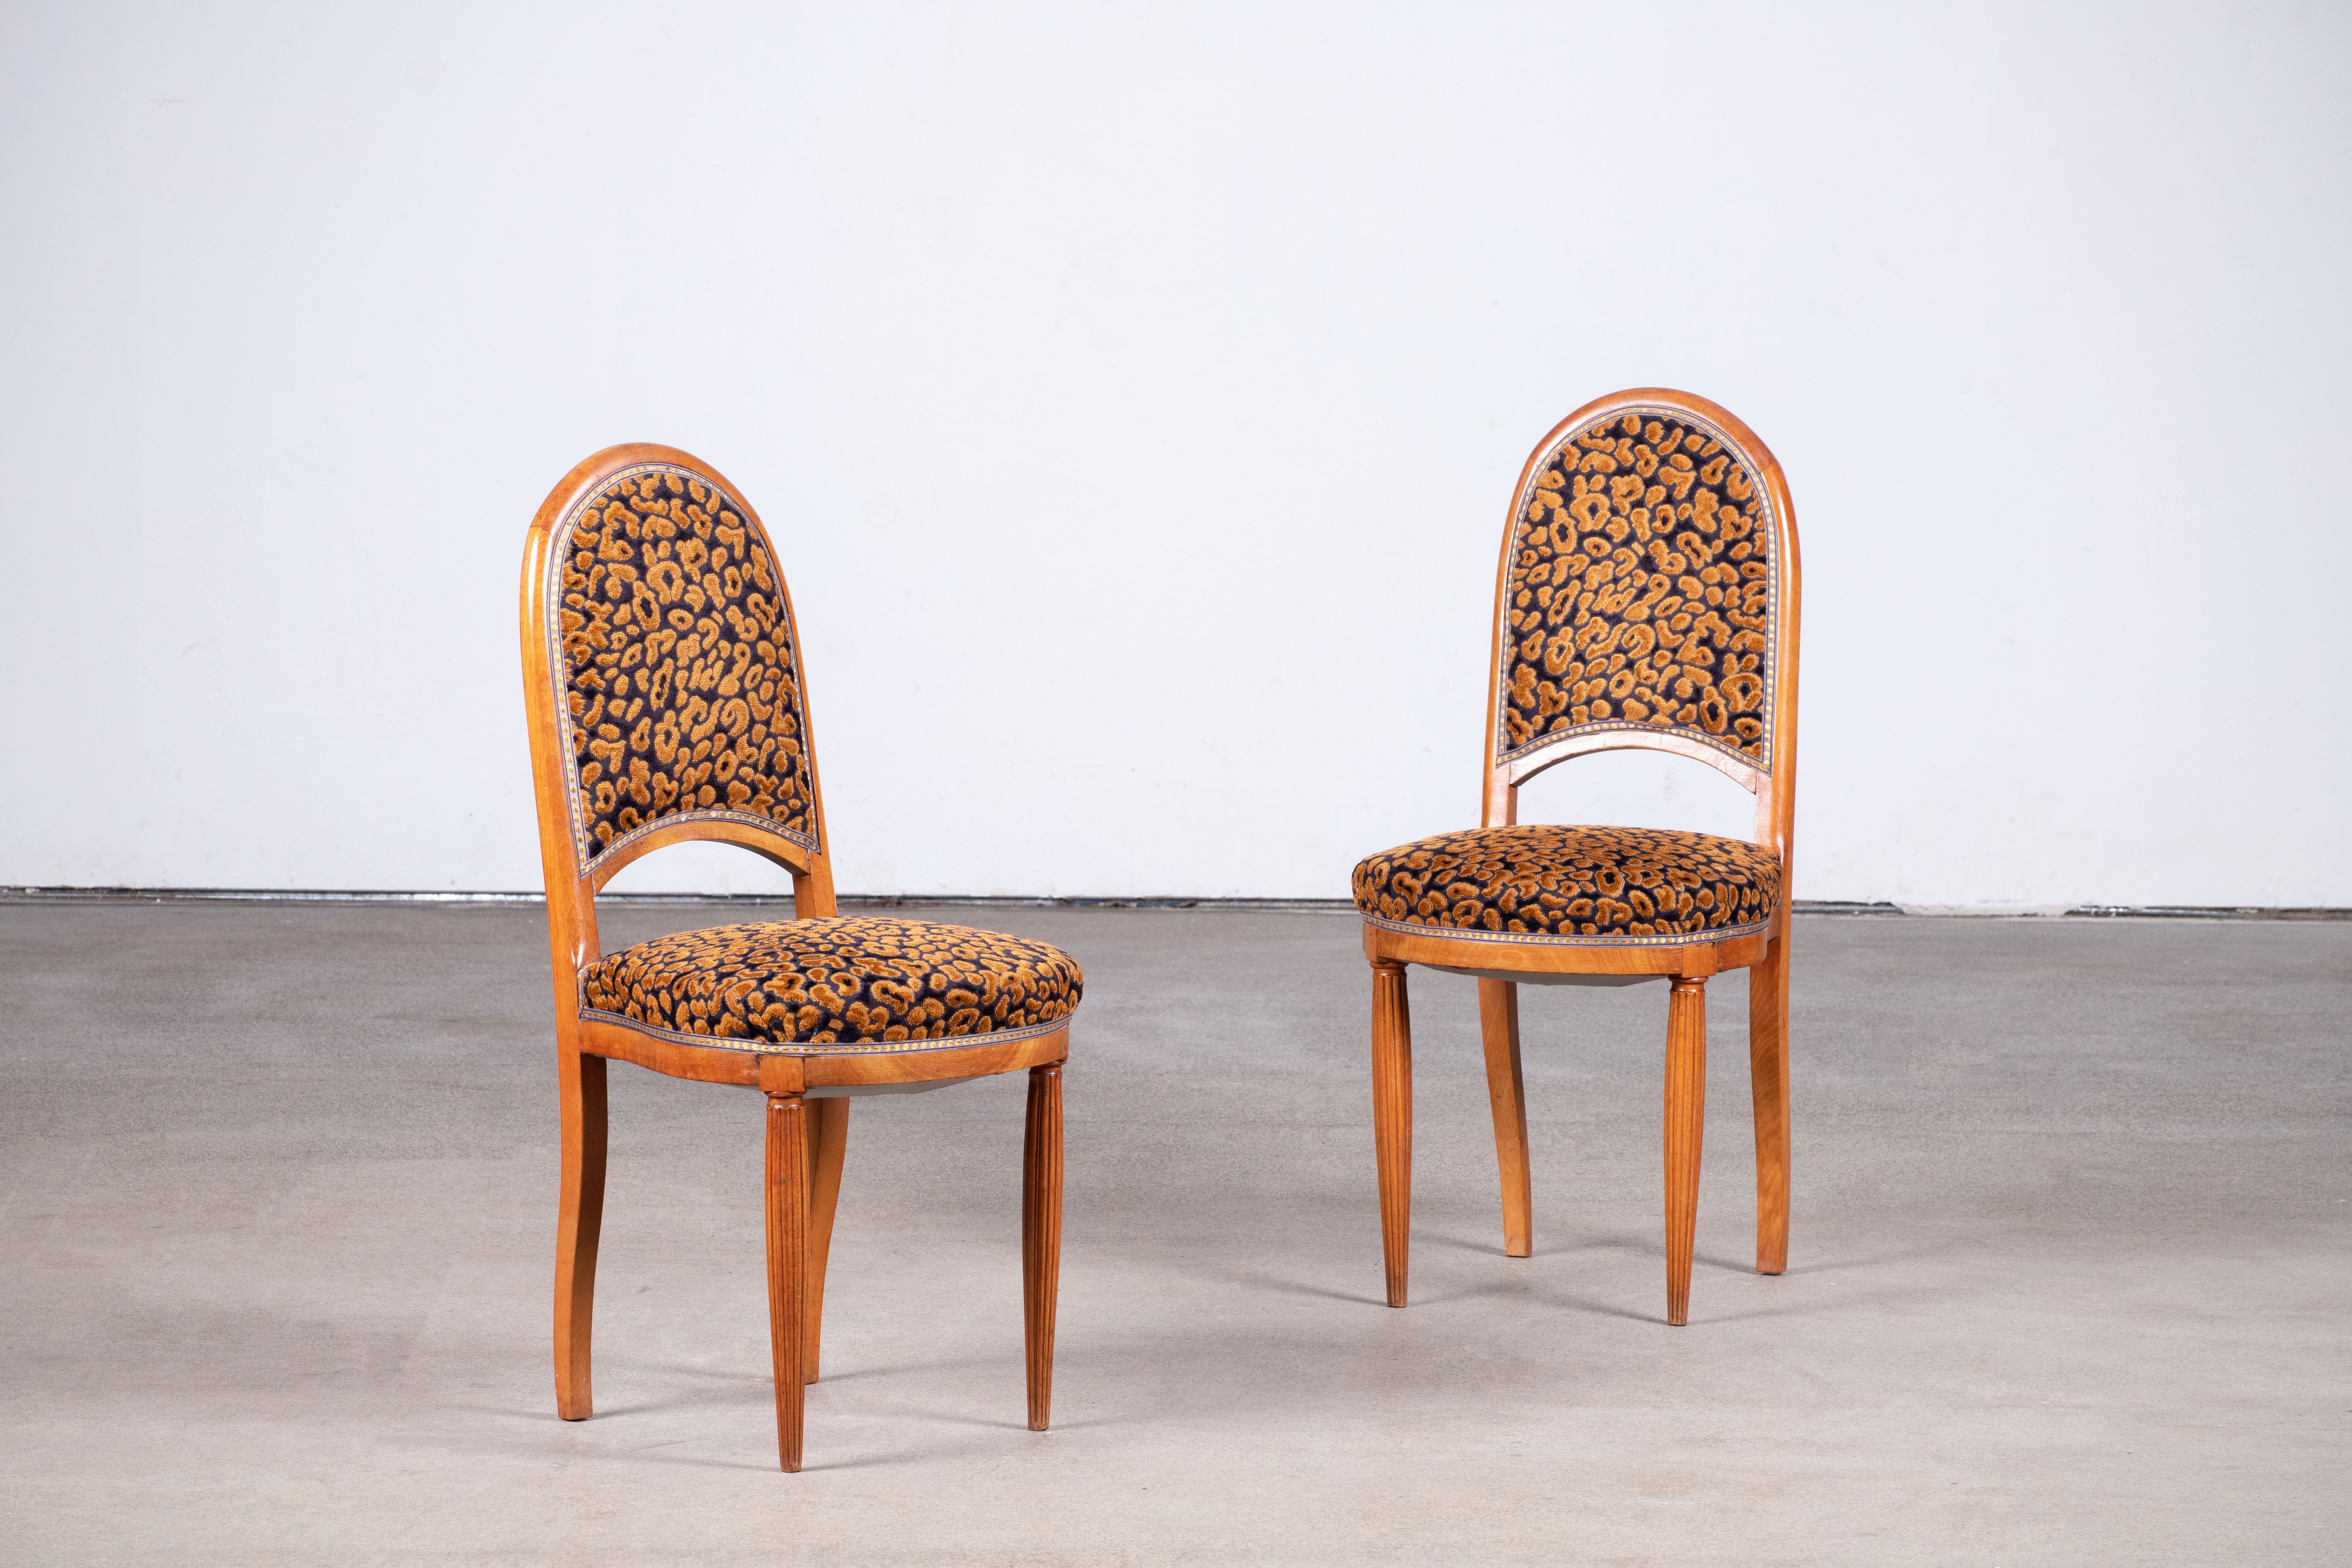 Pair of two beautiful chairs by Jallot, circa 1930.

    
   